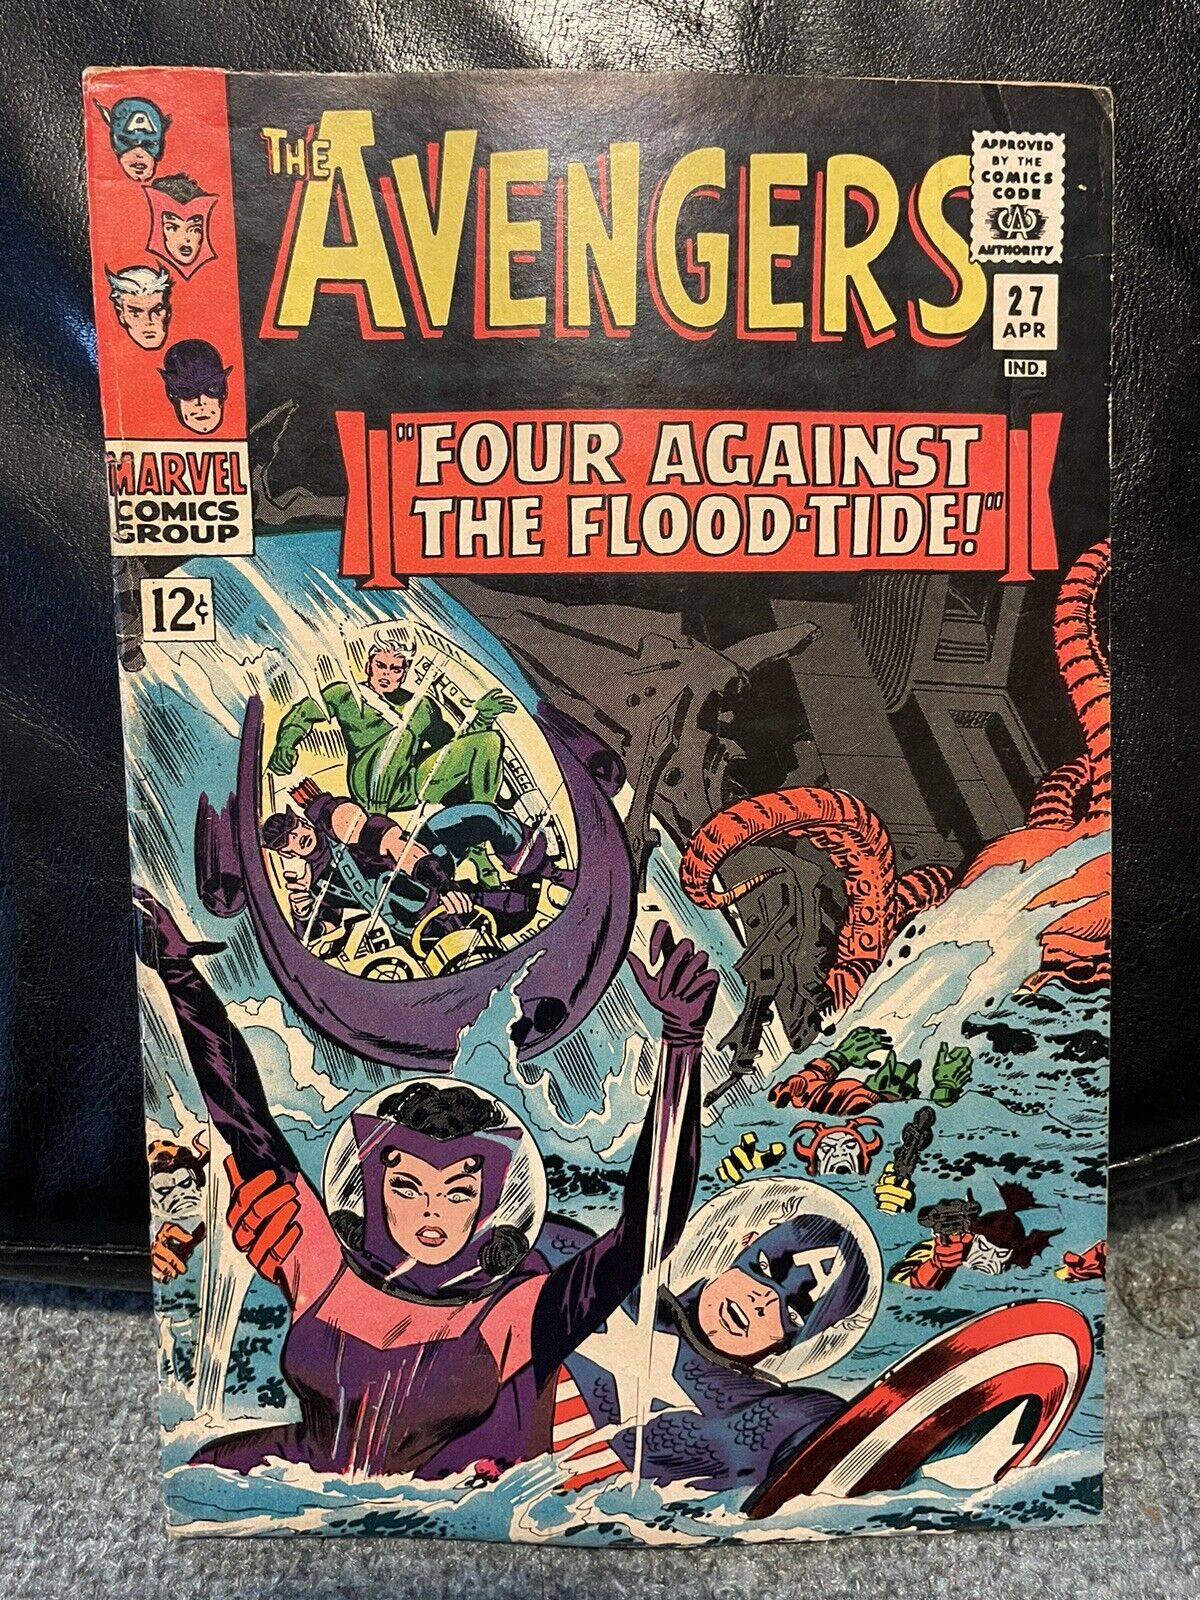 AVENGERS #27 Marvel 1966 by Stan Lee and Don Heck, Kirby cover